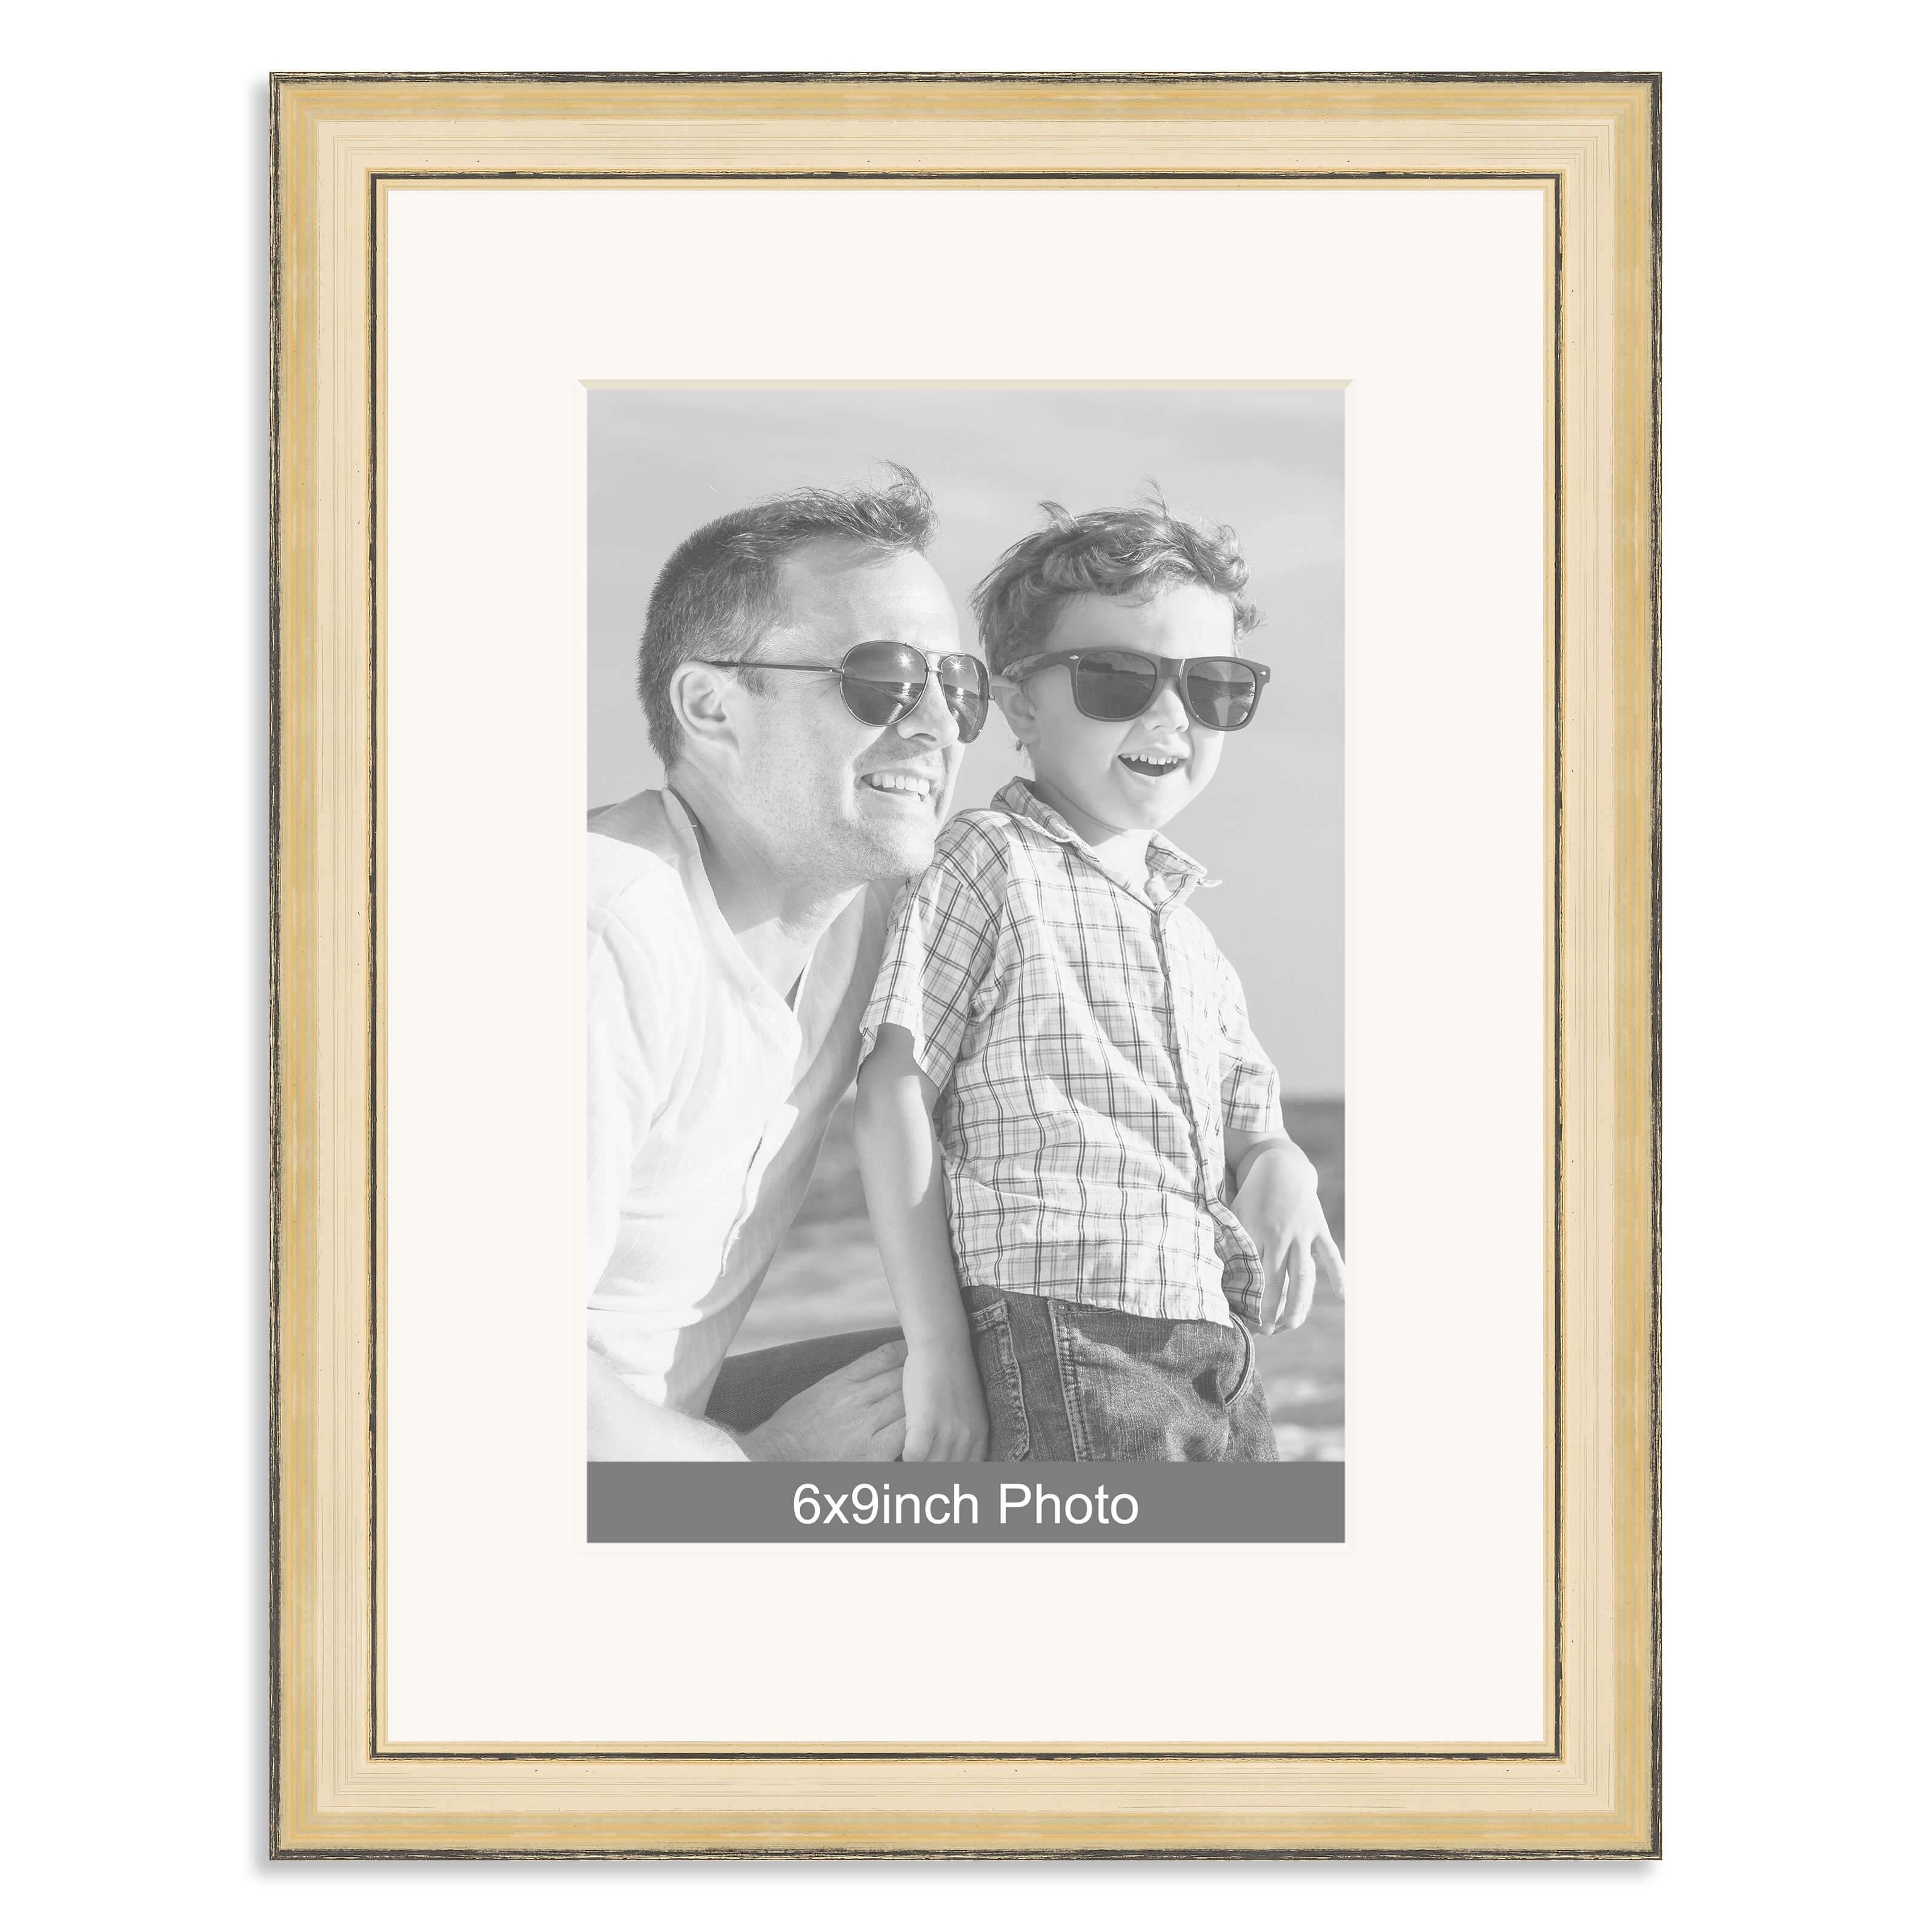 Gold Wooden Photo Frame with mount for a 9×6/6x9in Photo – No Photo required